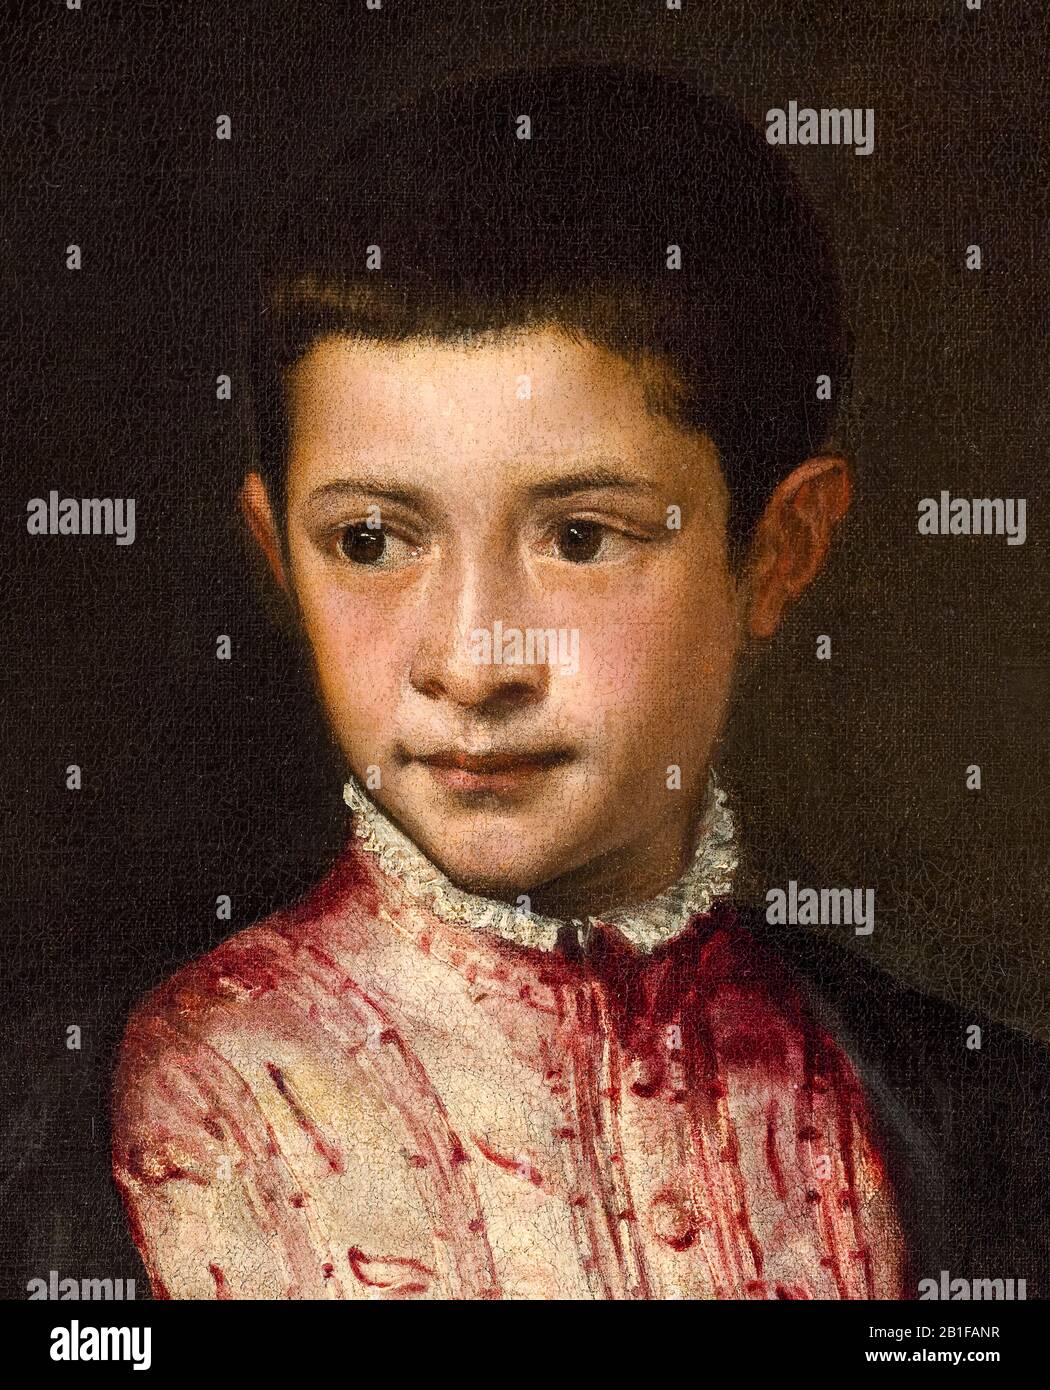 Ranuccio Farnese (1530-1565), later, Cardinal of Santa Lucia in Selci, portrait painting detail by Titian, 1542 Stock Photo